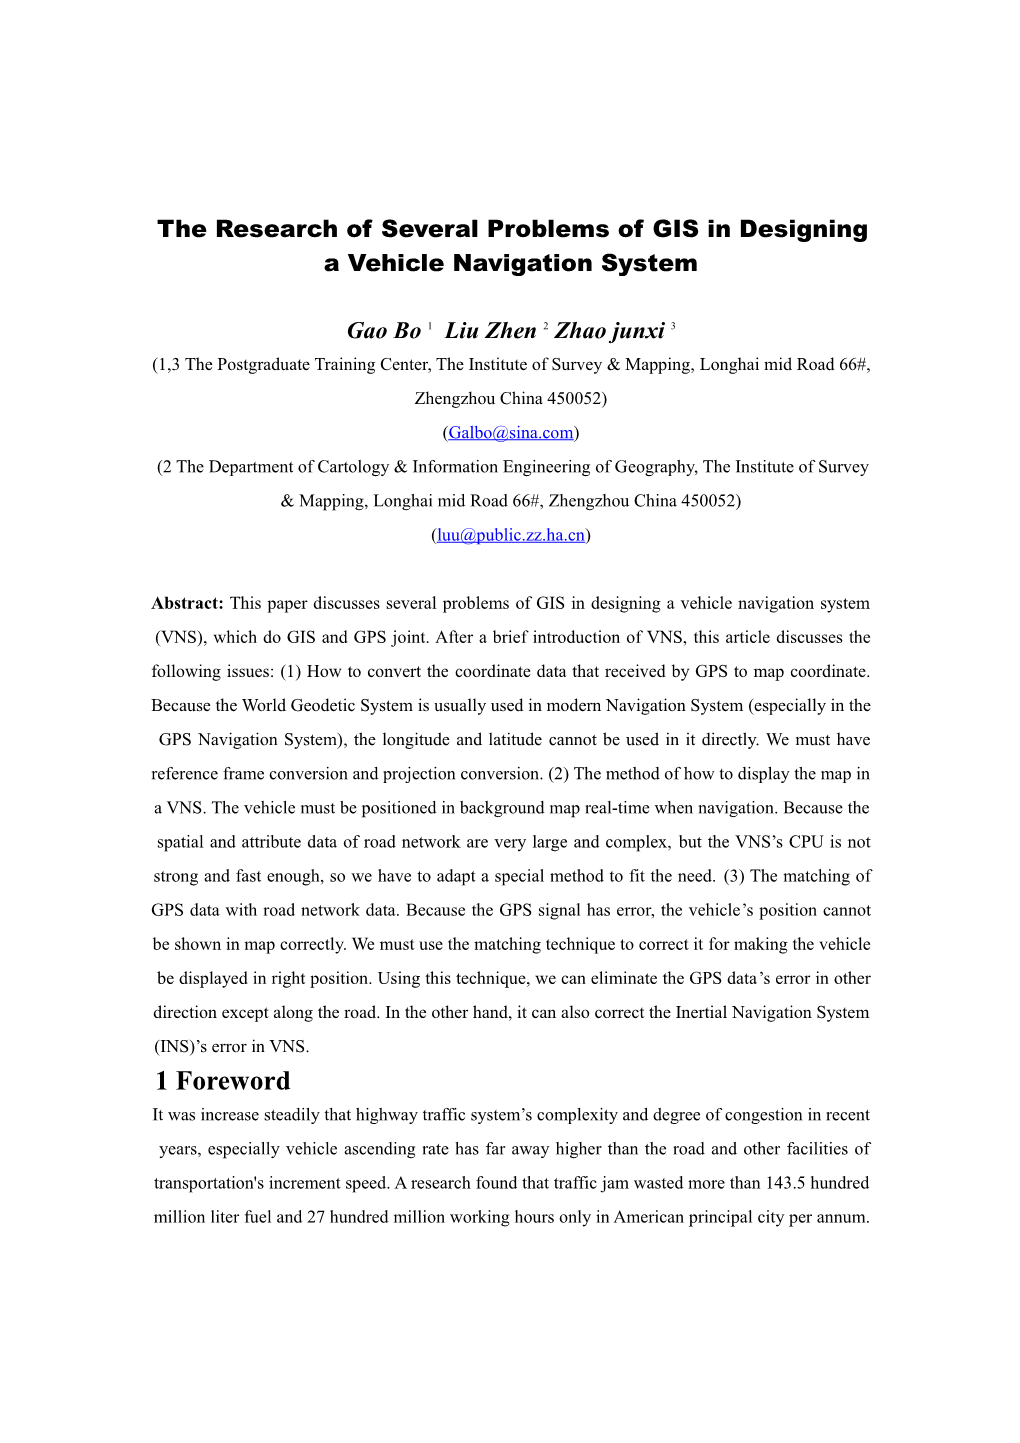 The Research of Several Problems of GIS in Designing a Vehicle Navigation System